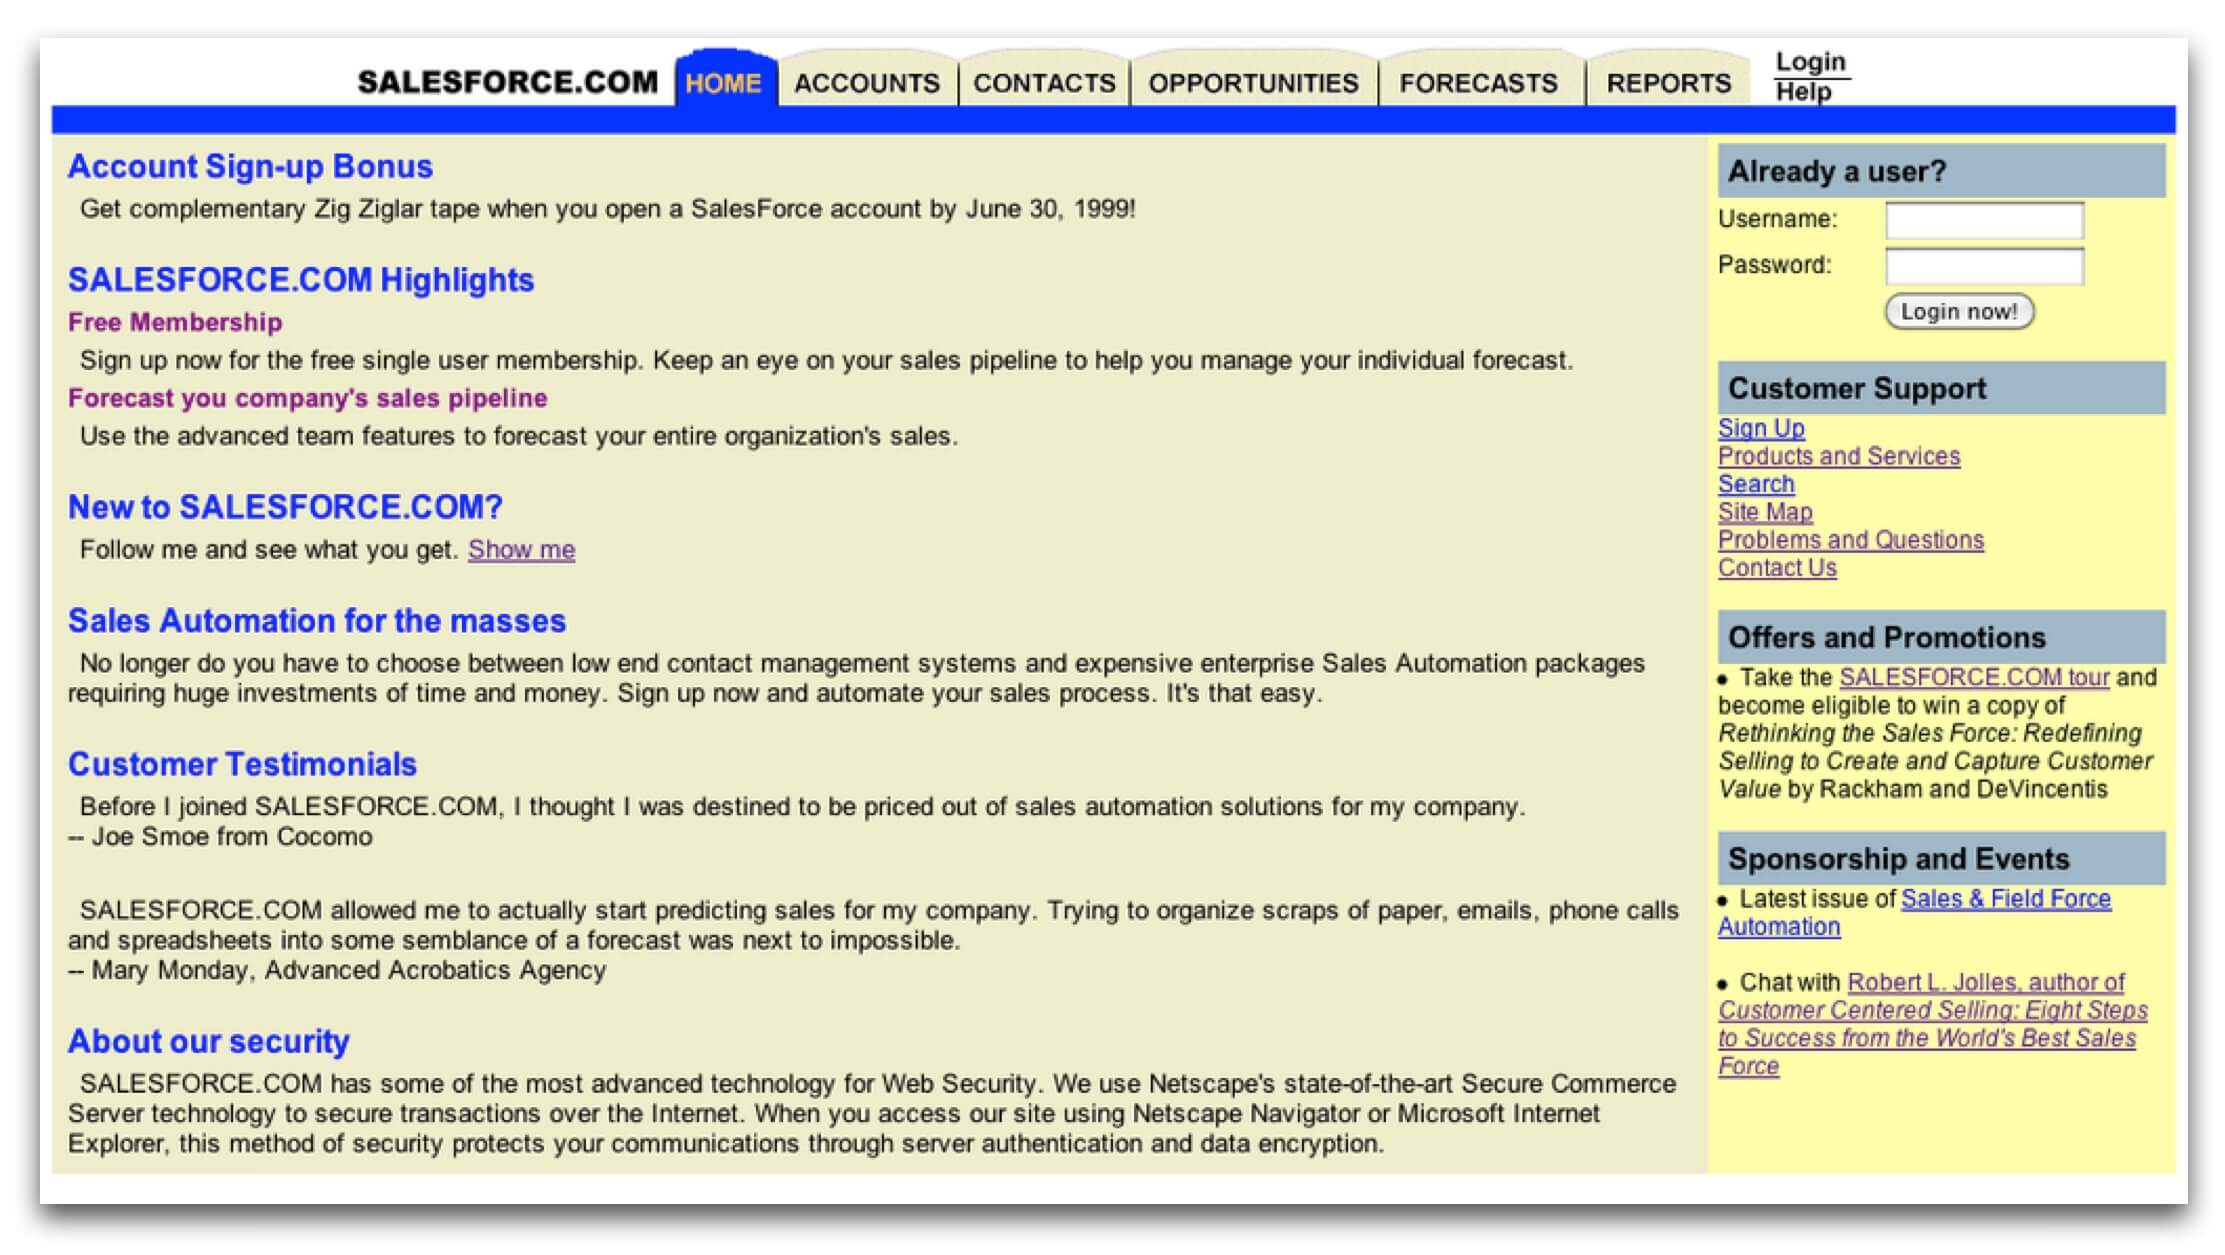 The Salesforce homepage when it launched in 1999